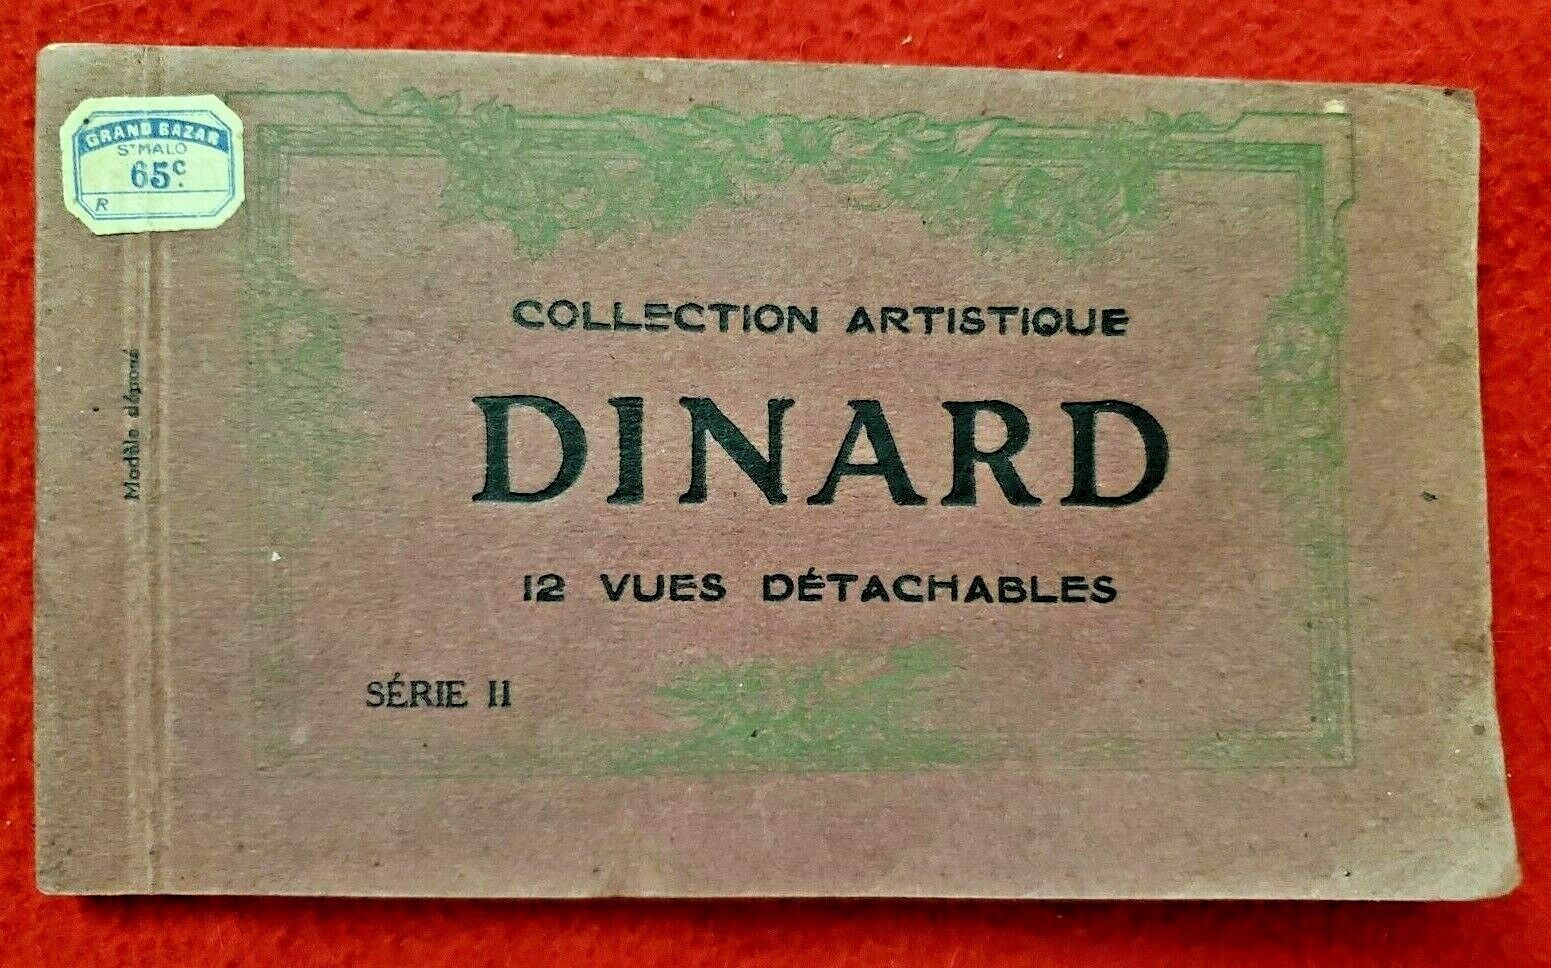 Dinard-Collection Artistique, Serie 11-12 VINTAGE French Postcards, Early 20th c